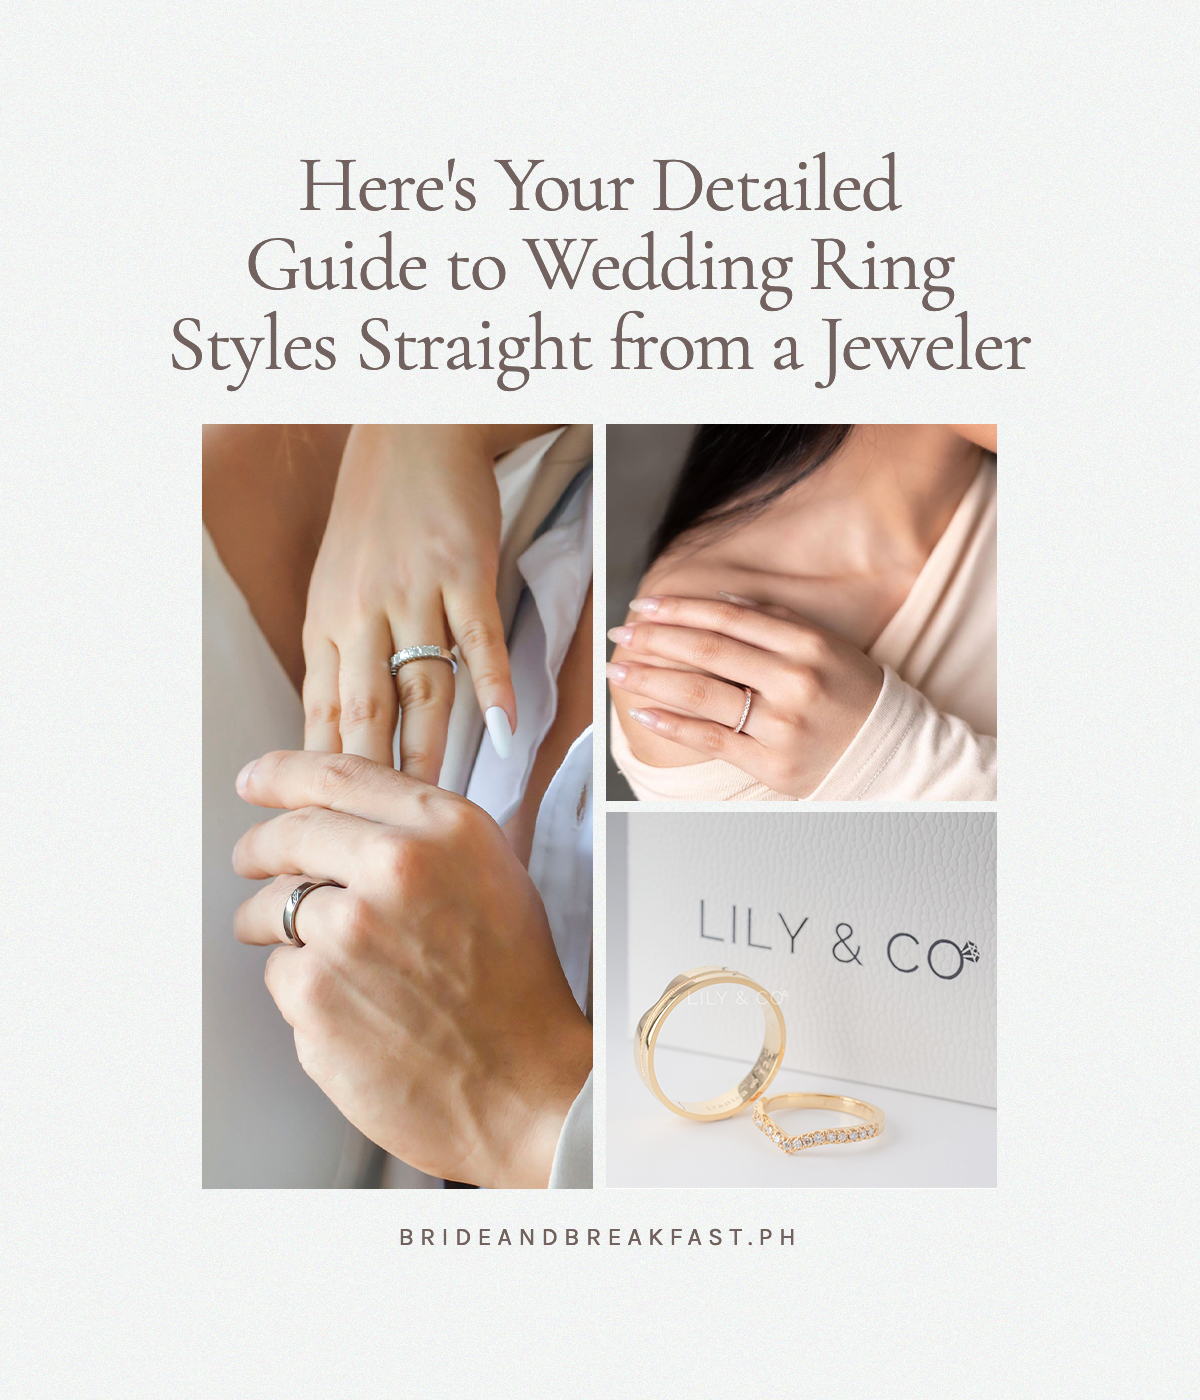 Here's Your Detailed Guide to Wedding Ring Styles Straight from a Jeweler